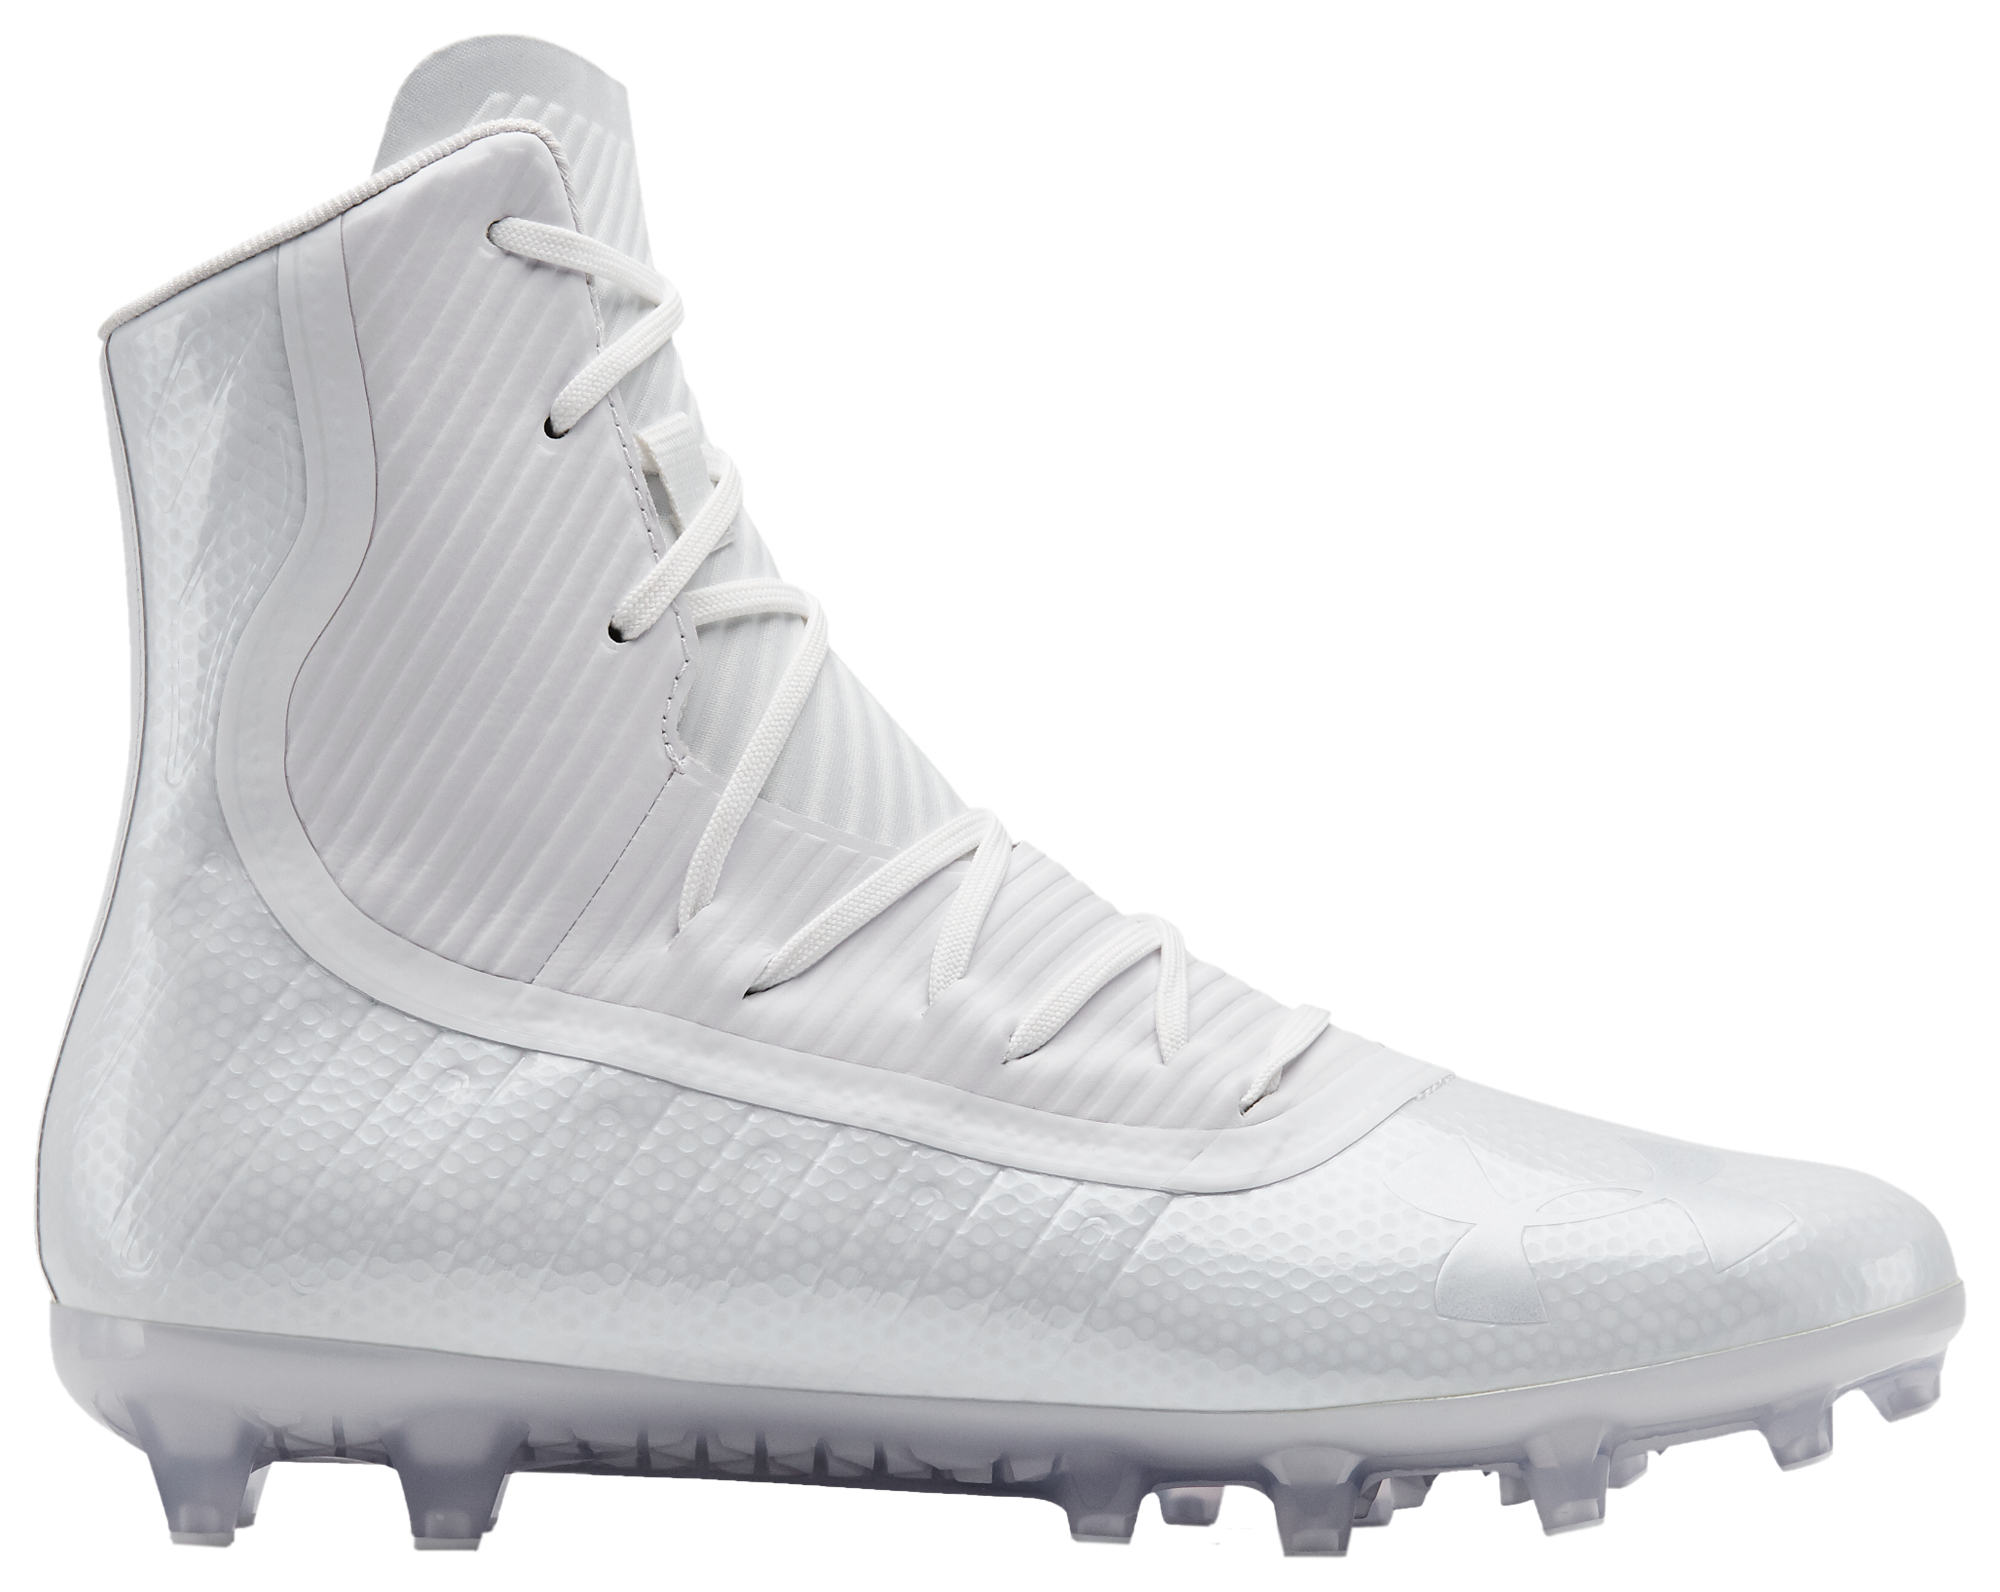 white under armor cleats